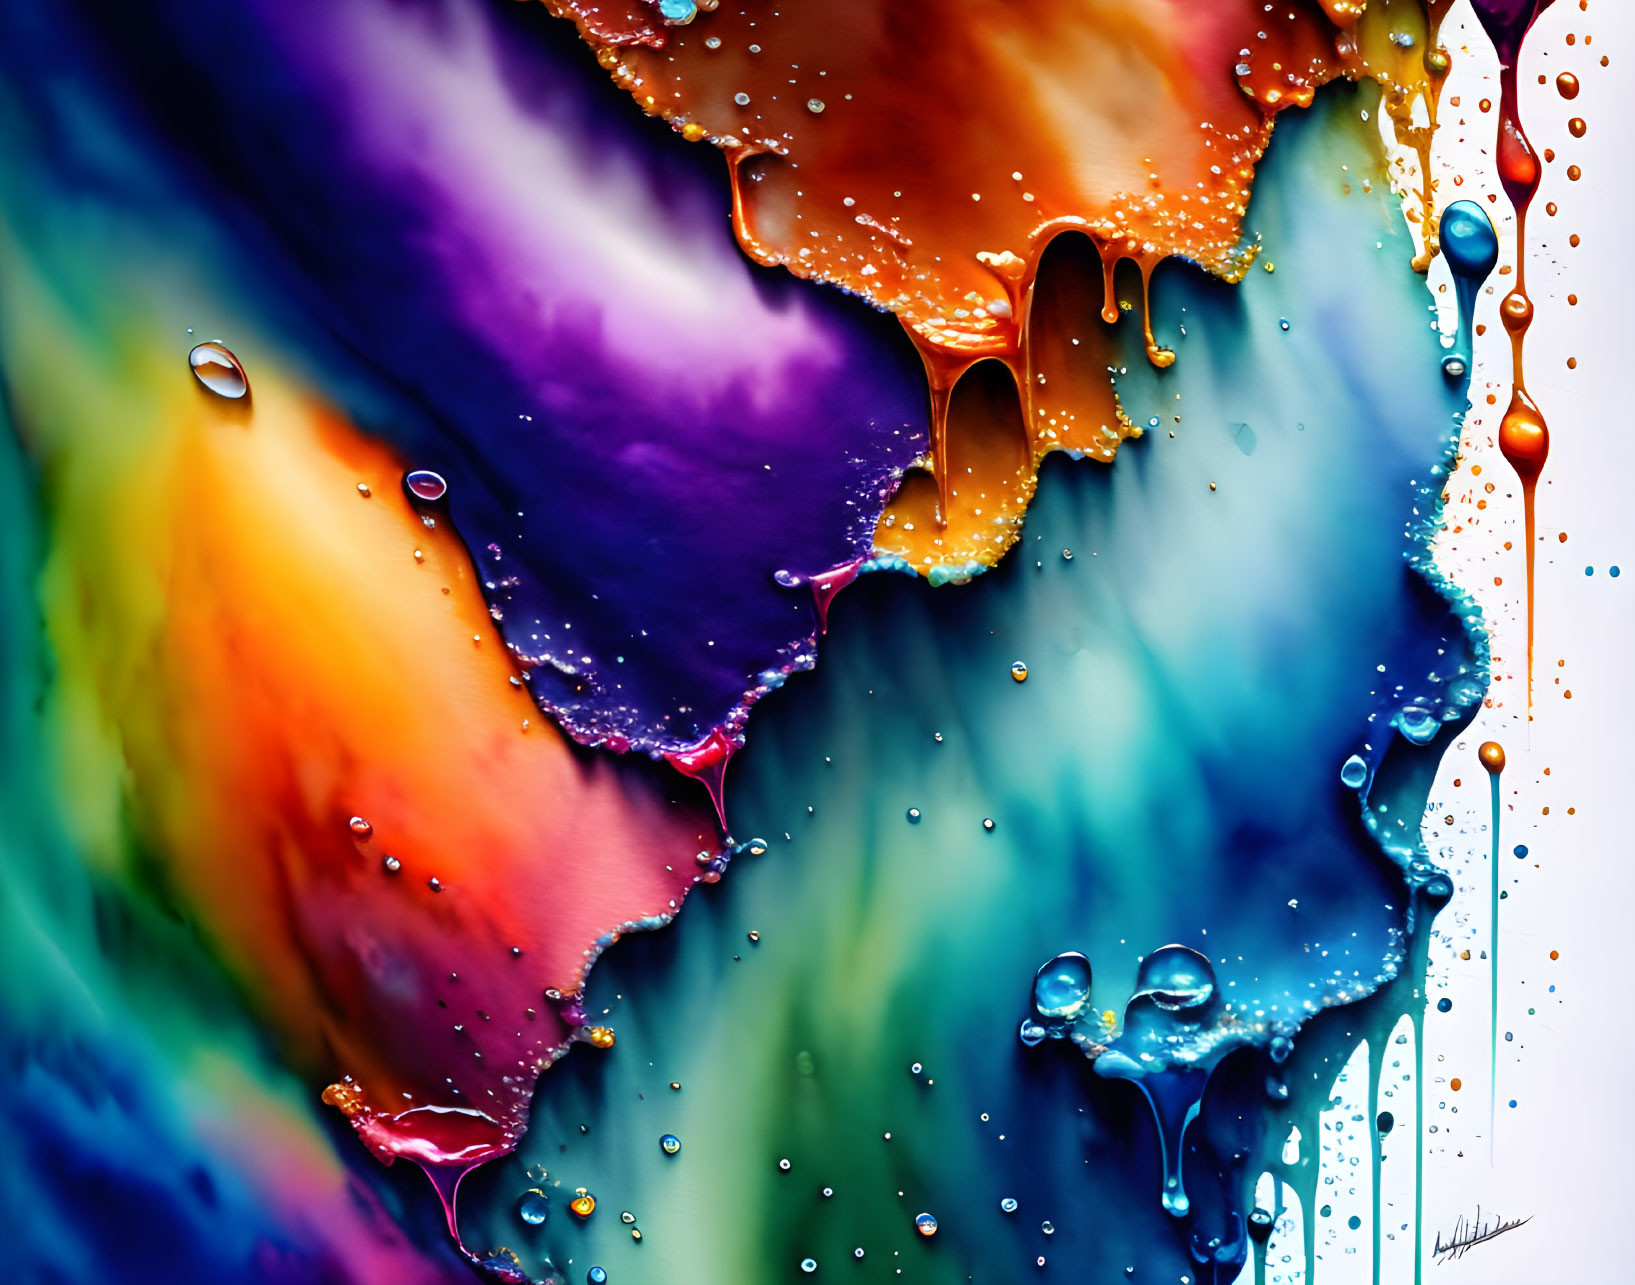 Colorful Abstract Art: Vibrant Liquid Forms in Blue, Purple, Orange, and Green